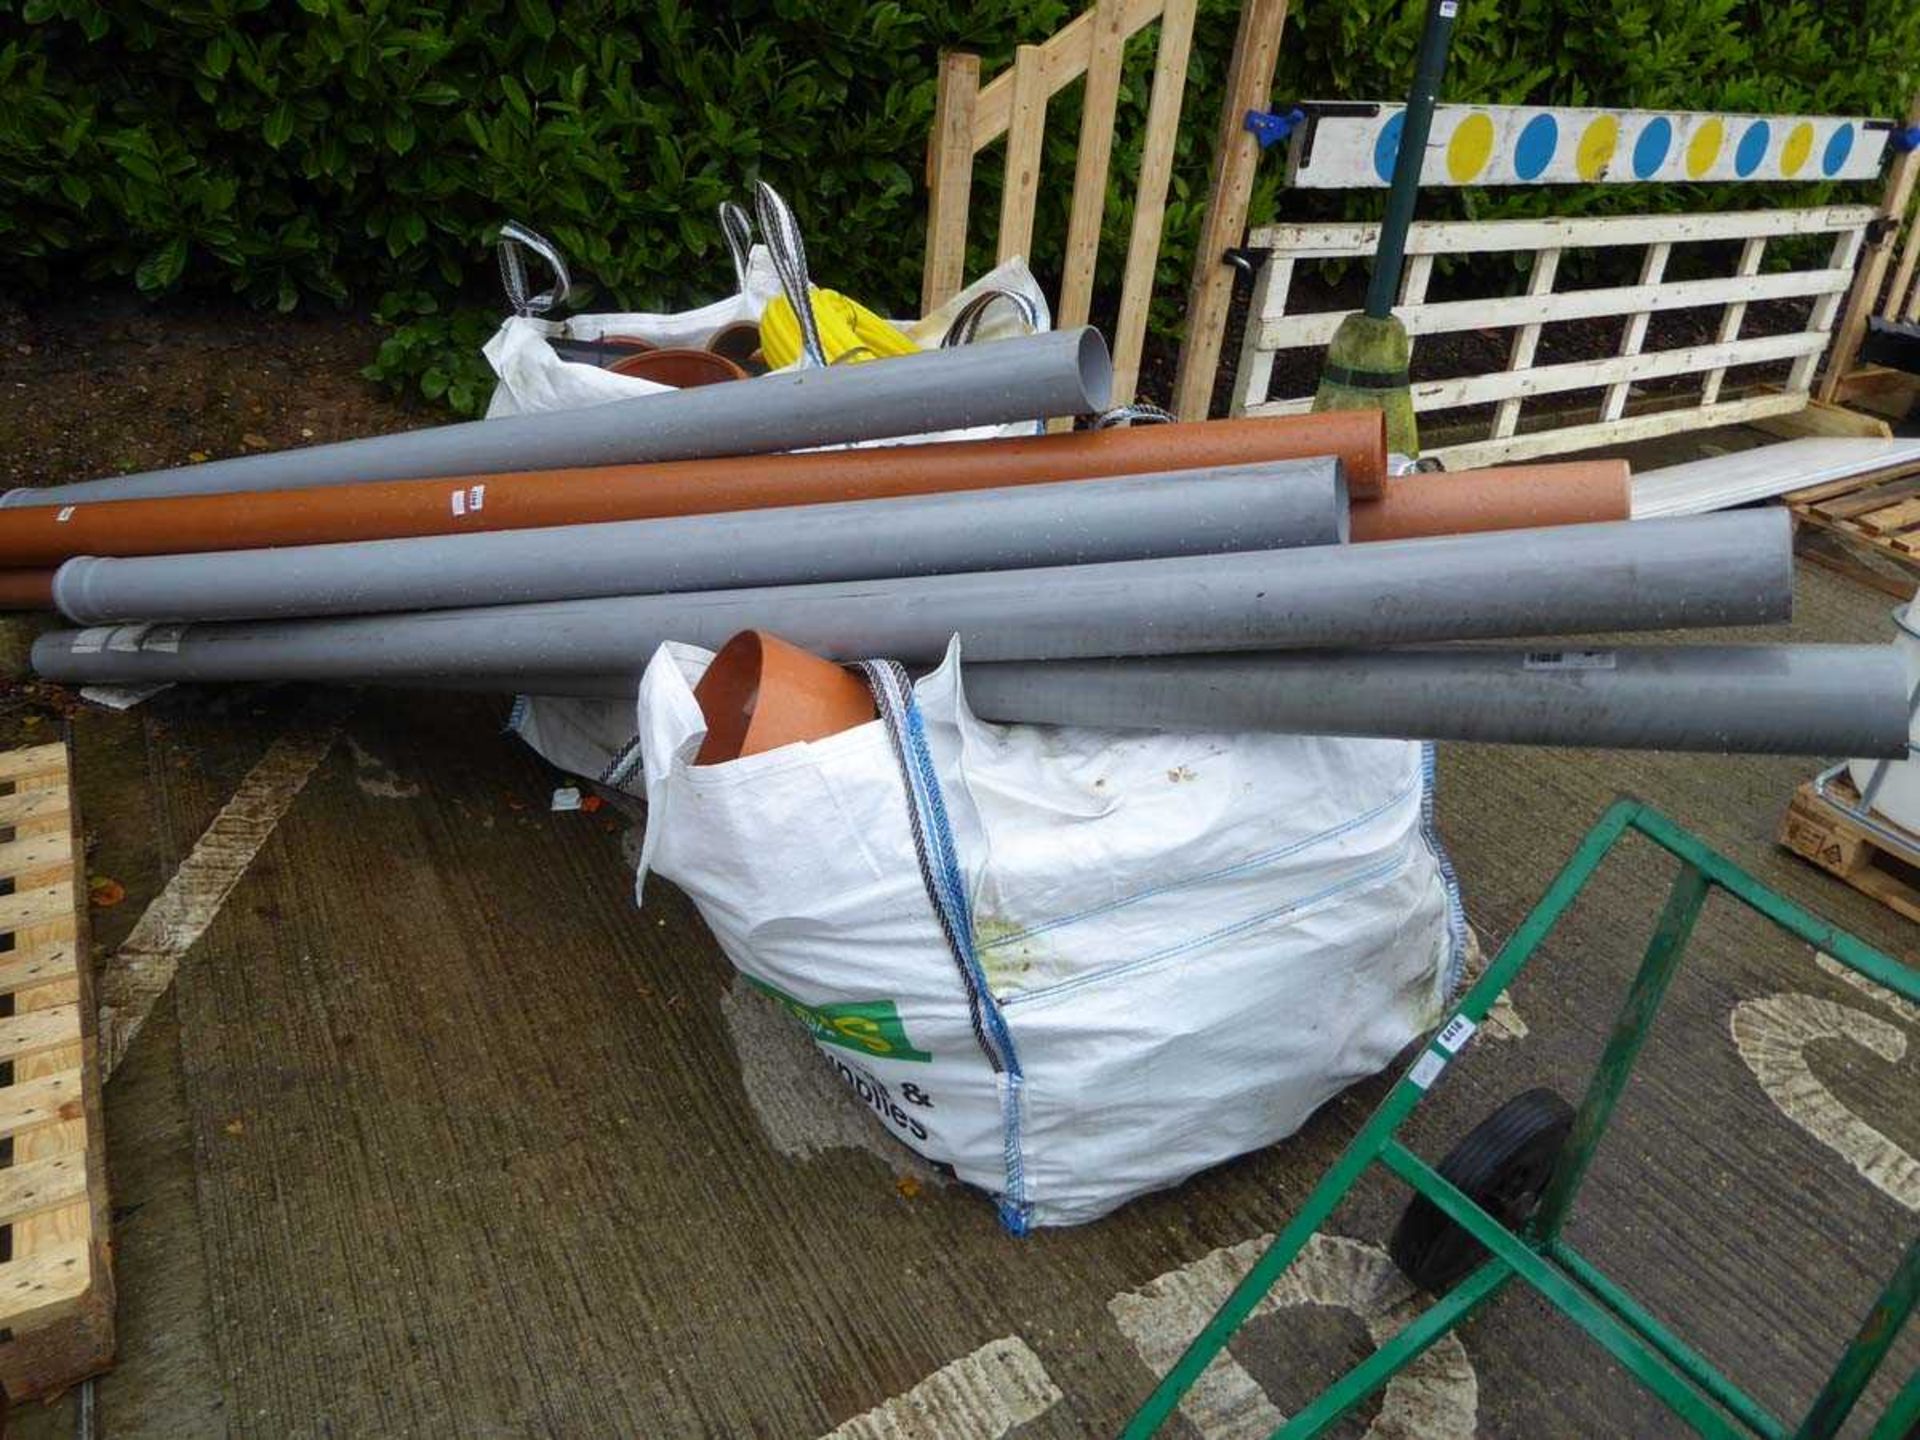 2 large bags containing drainage items plus large drainage pipes